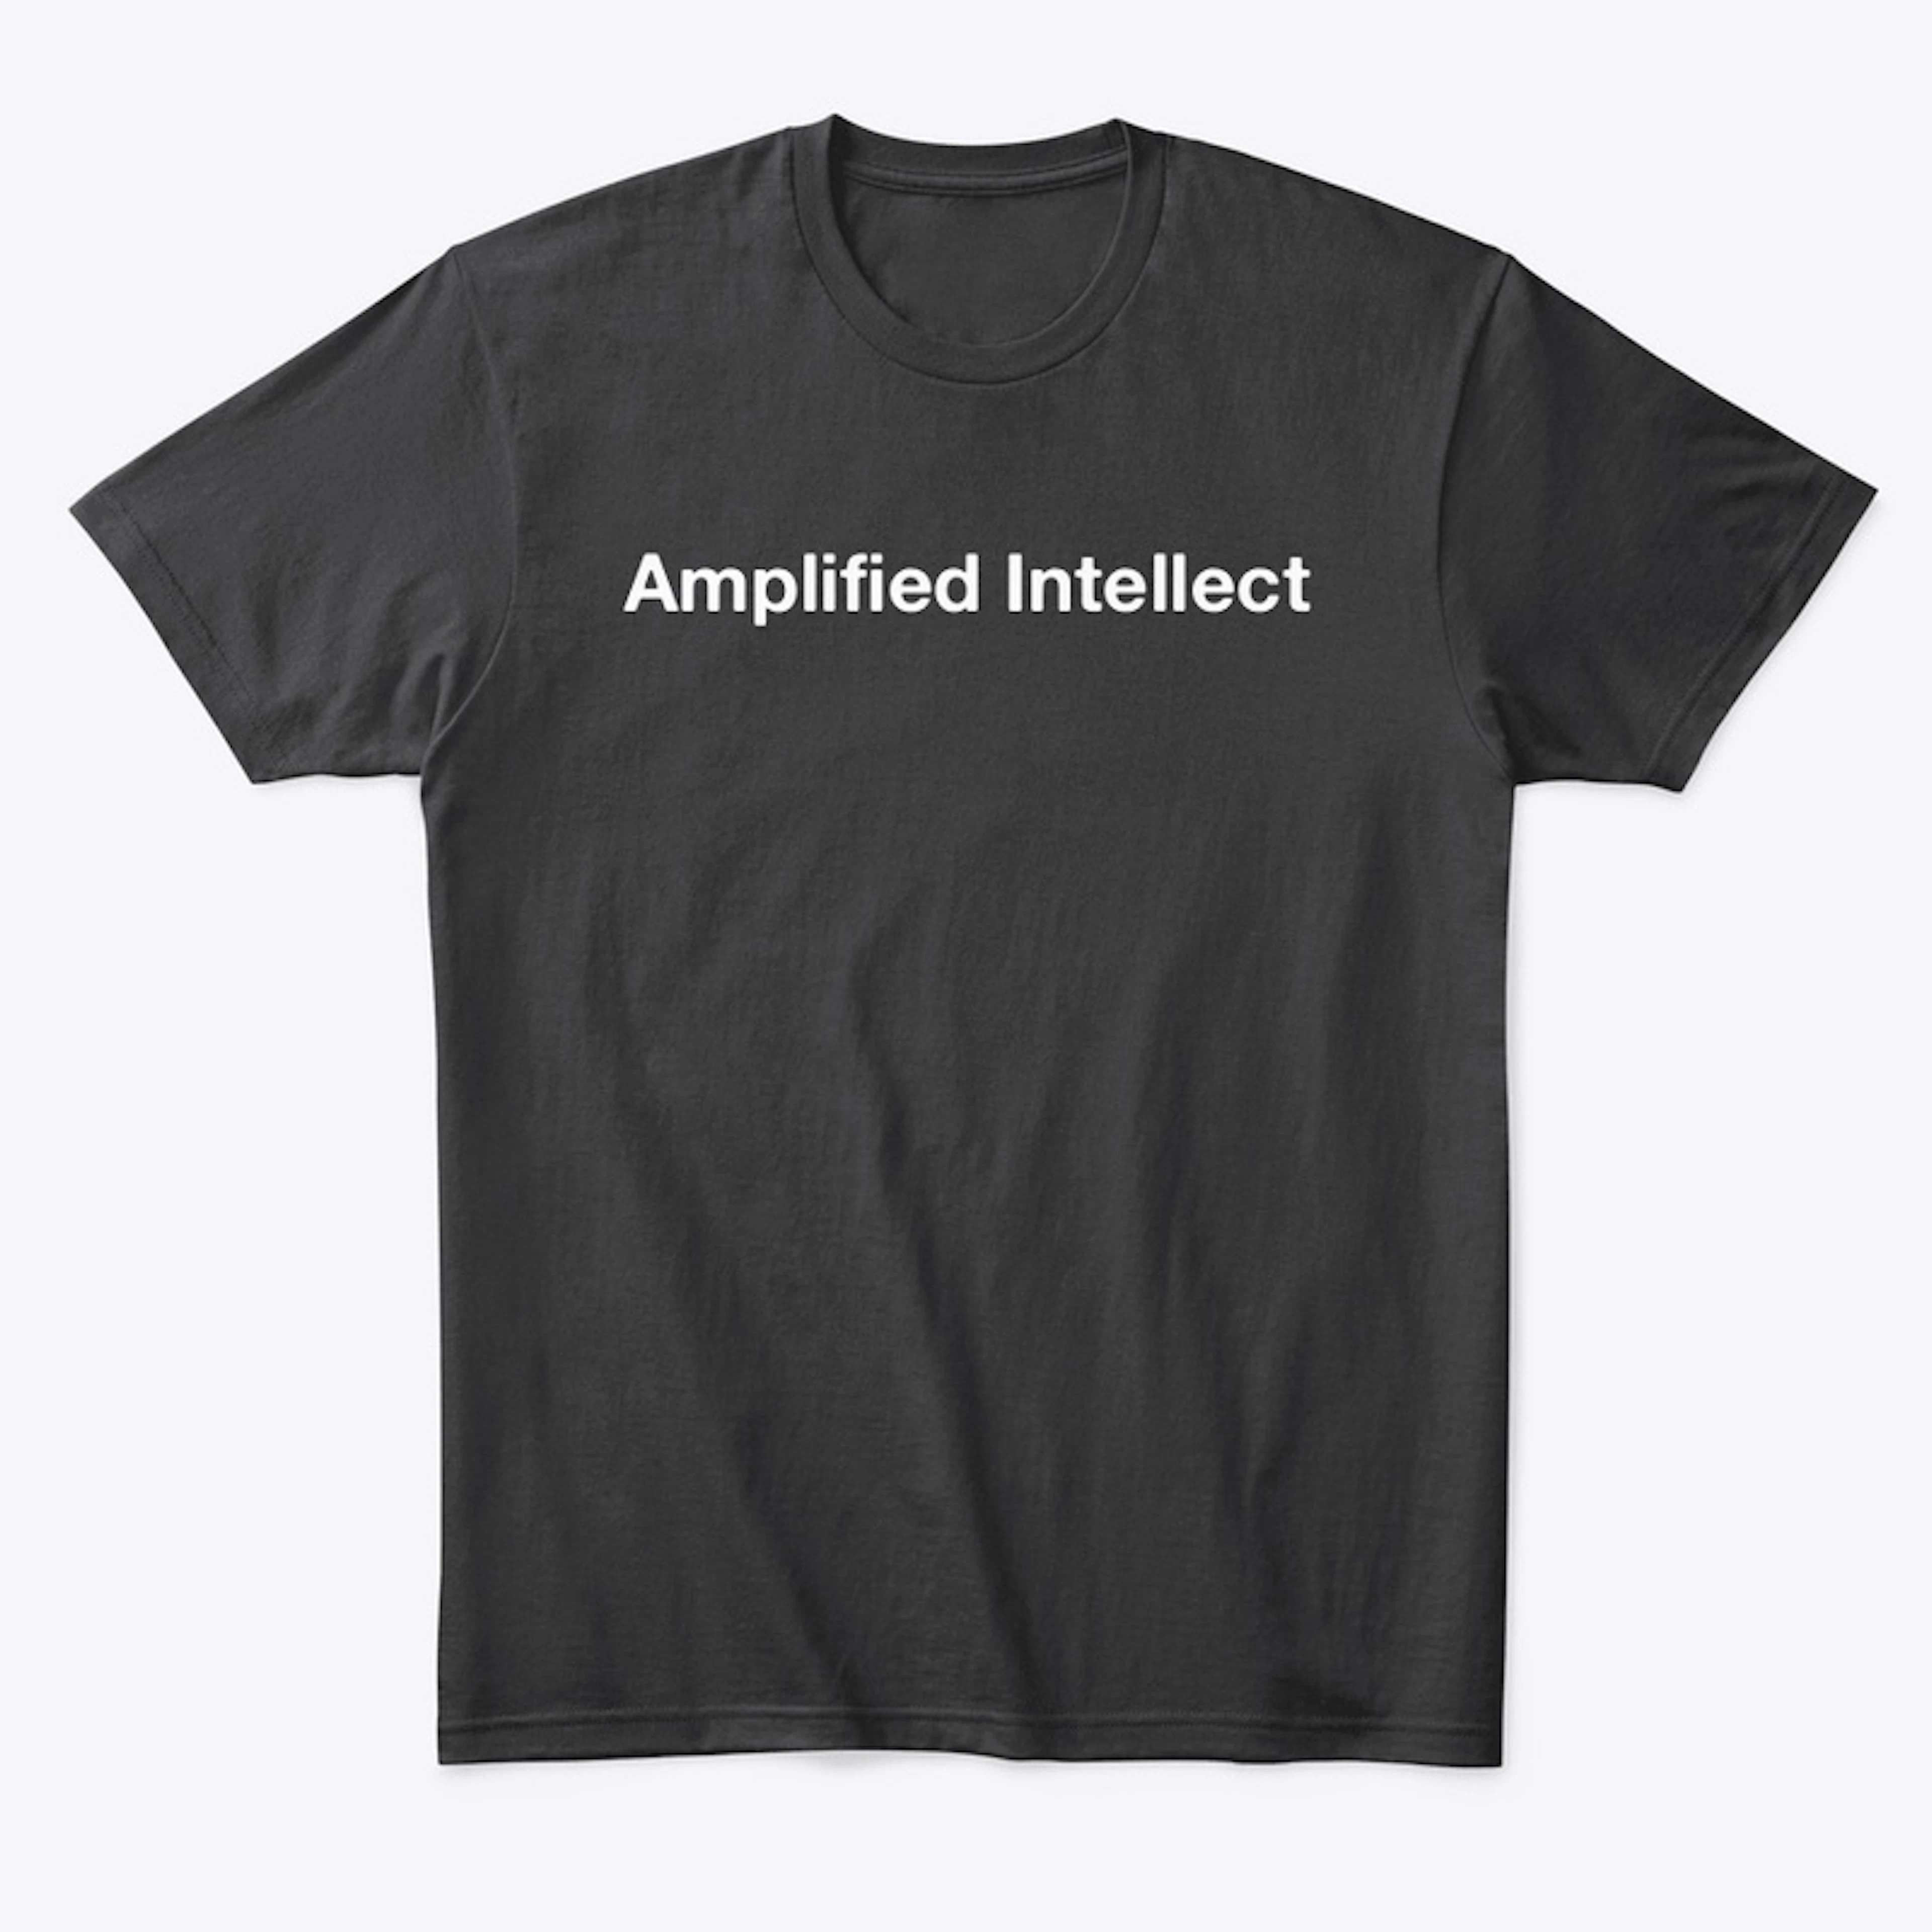 Amplified Intellect